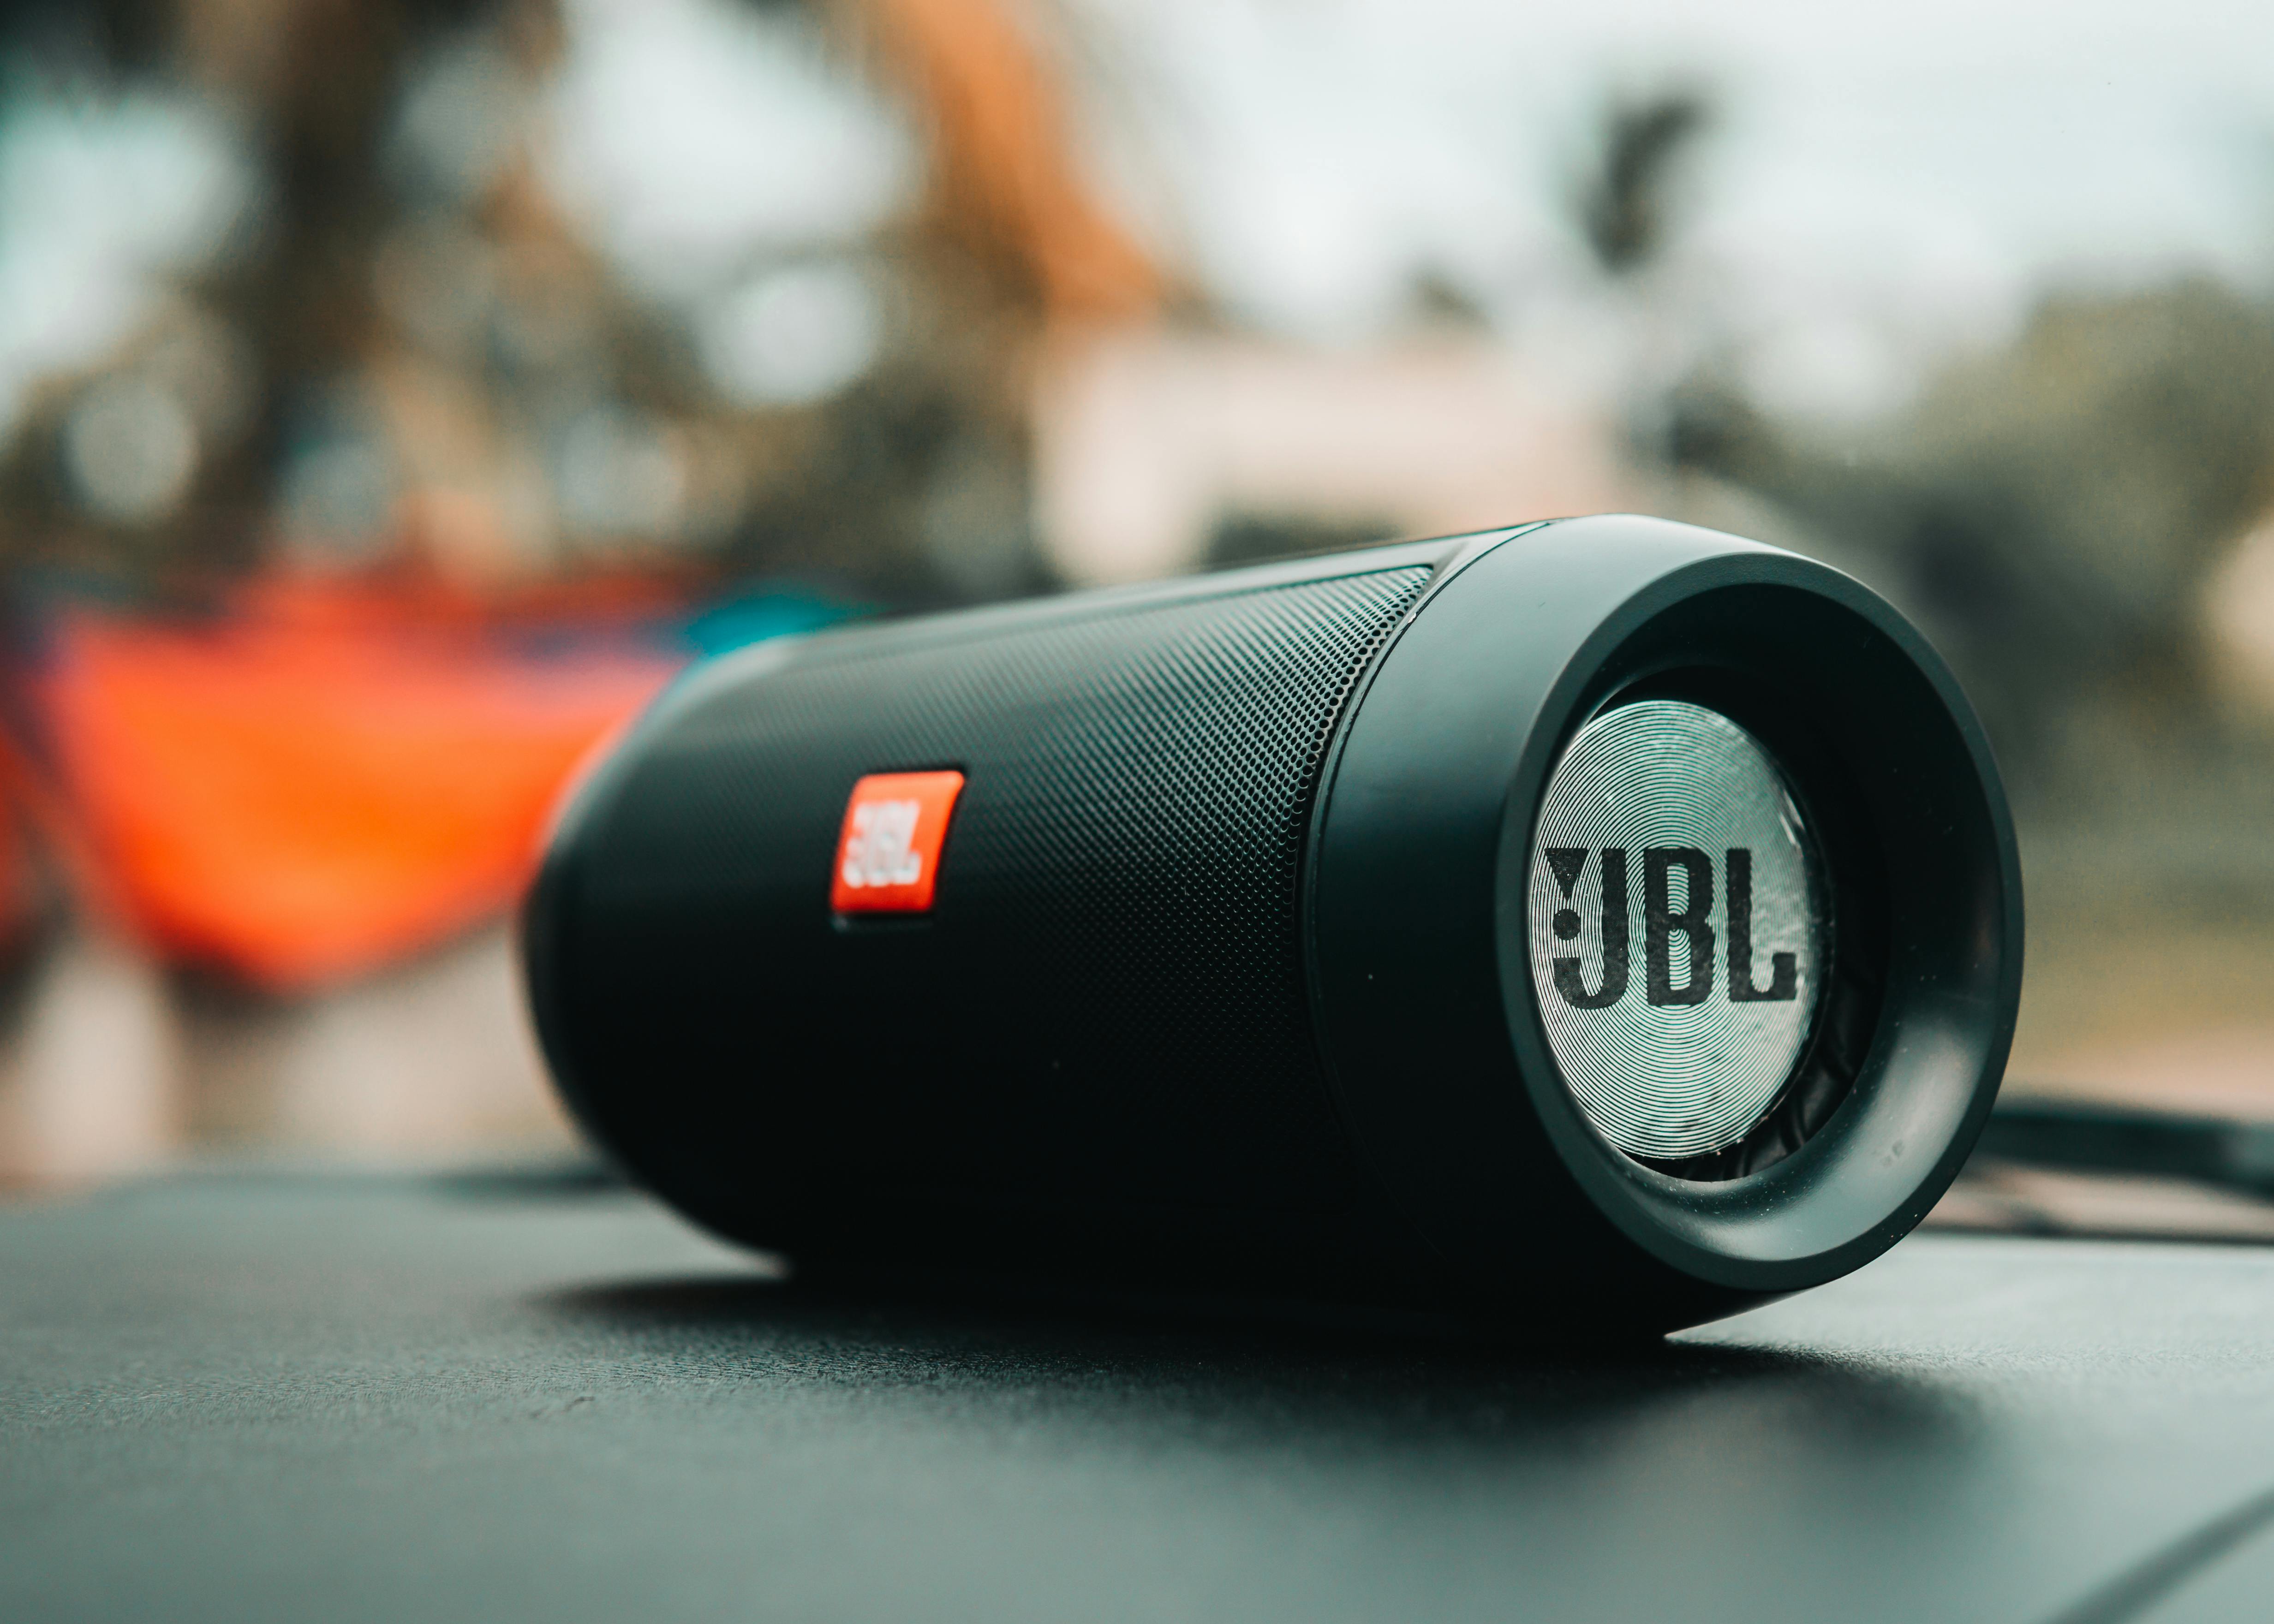 514 Jbl Audio Photos & High Res Pictures - Getty Images